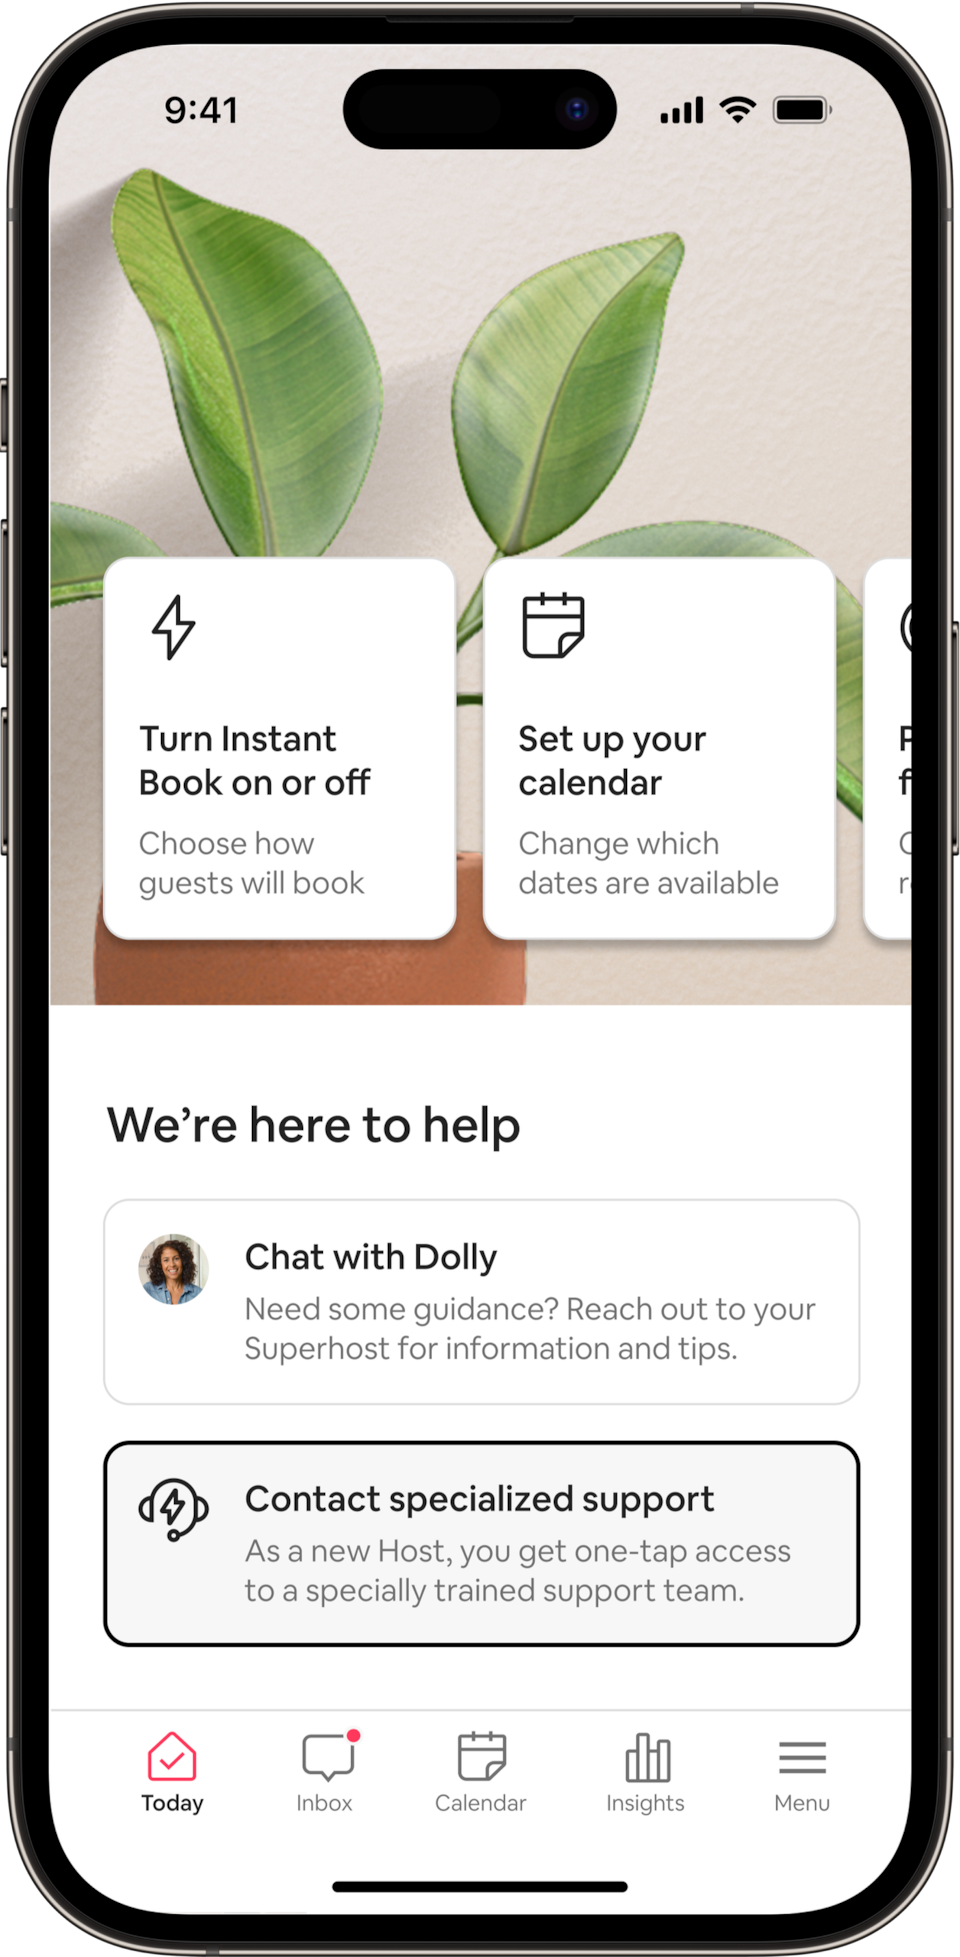 A phone shows the Today tab for Airbnb Hosts, with various settings for them to manage their listing, such as a calendar tool. In the lower half of the screen there are options for new Hosts to chat with their Superhost, or access specialized support from Airbnb, by simply tapping the button on their screen.